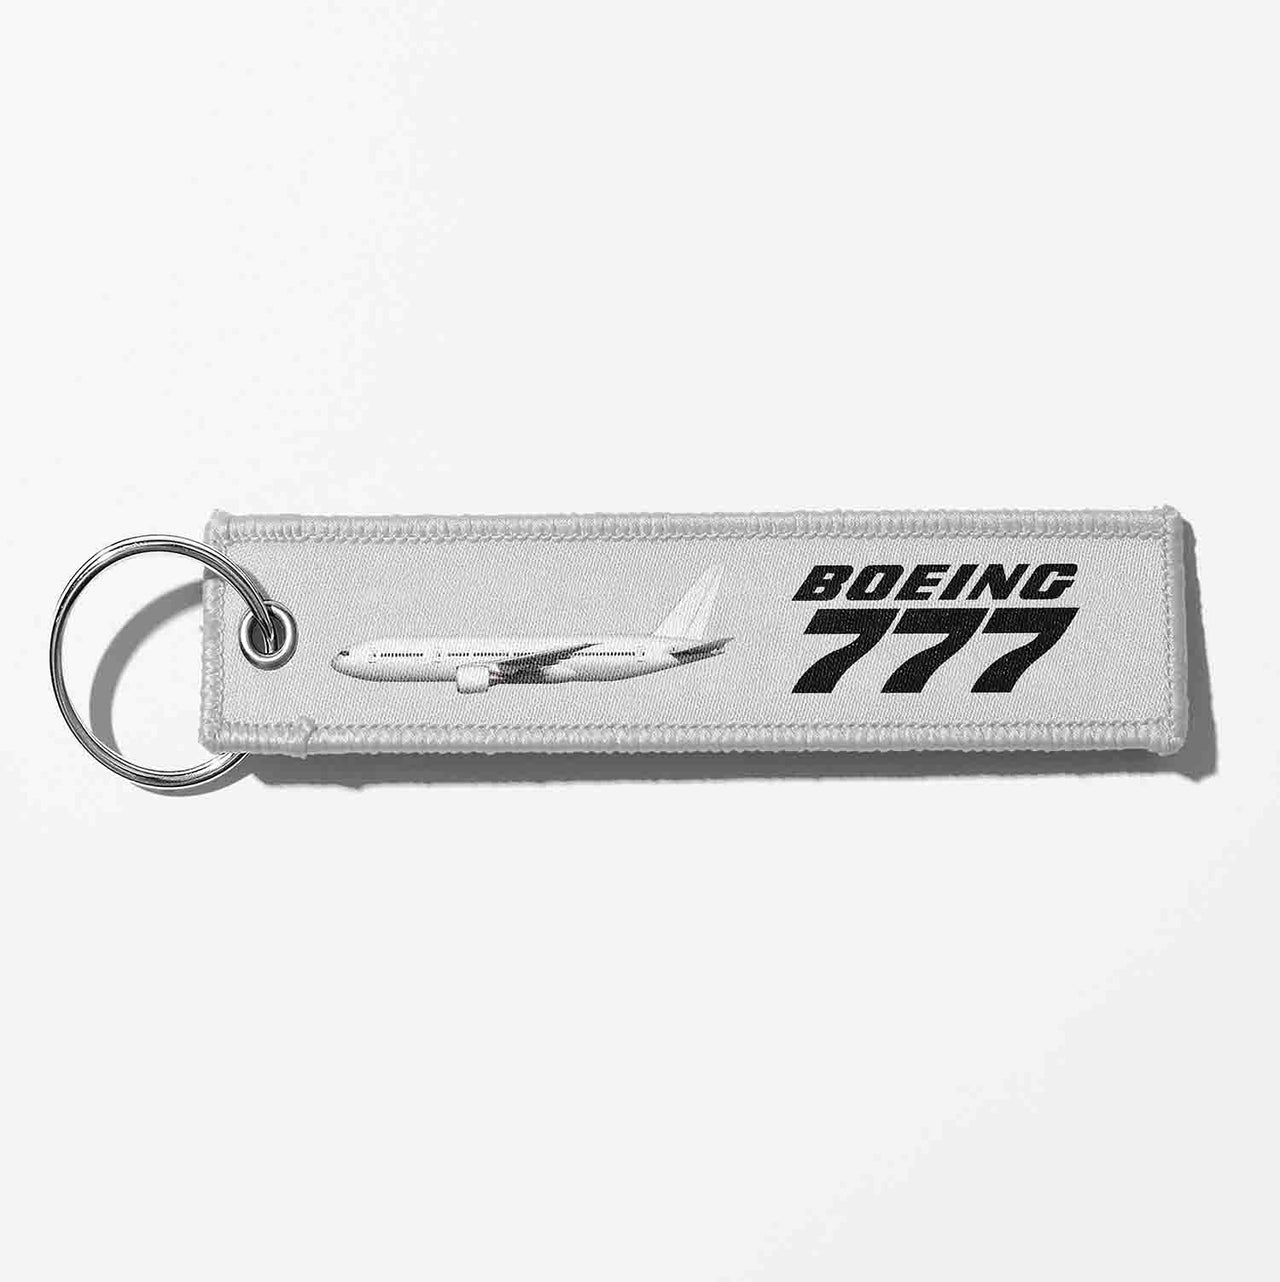 The Boeing 777 Designed Key Chains